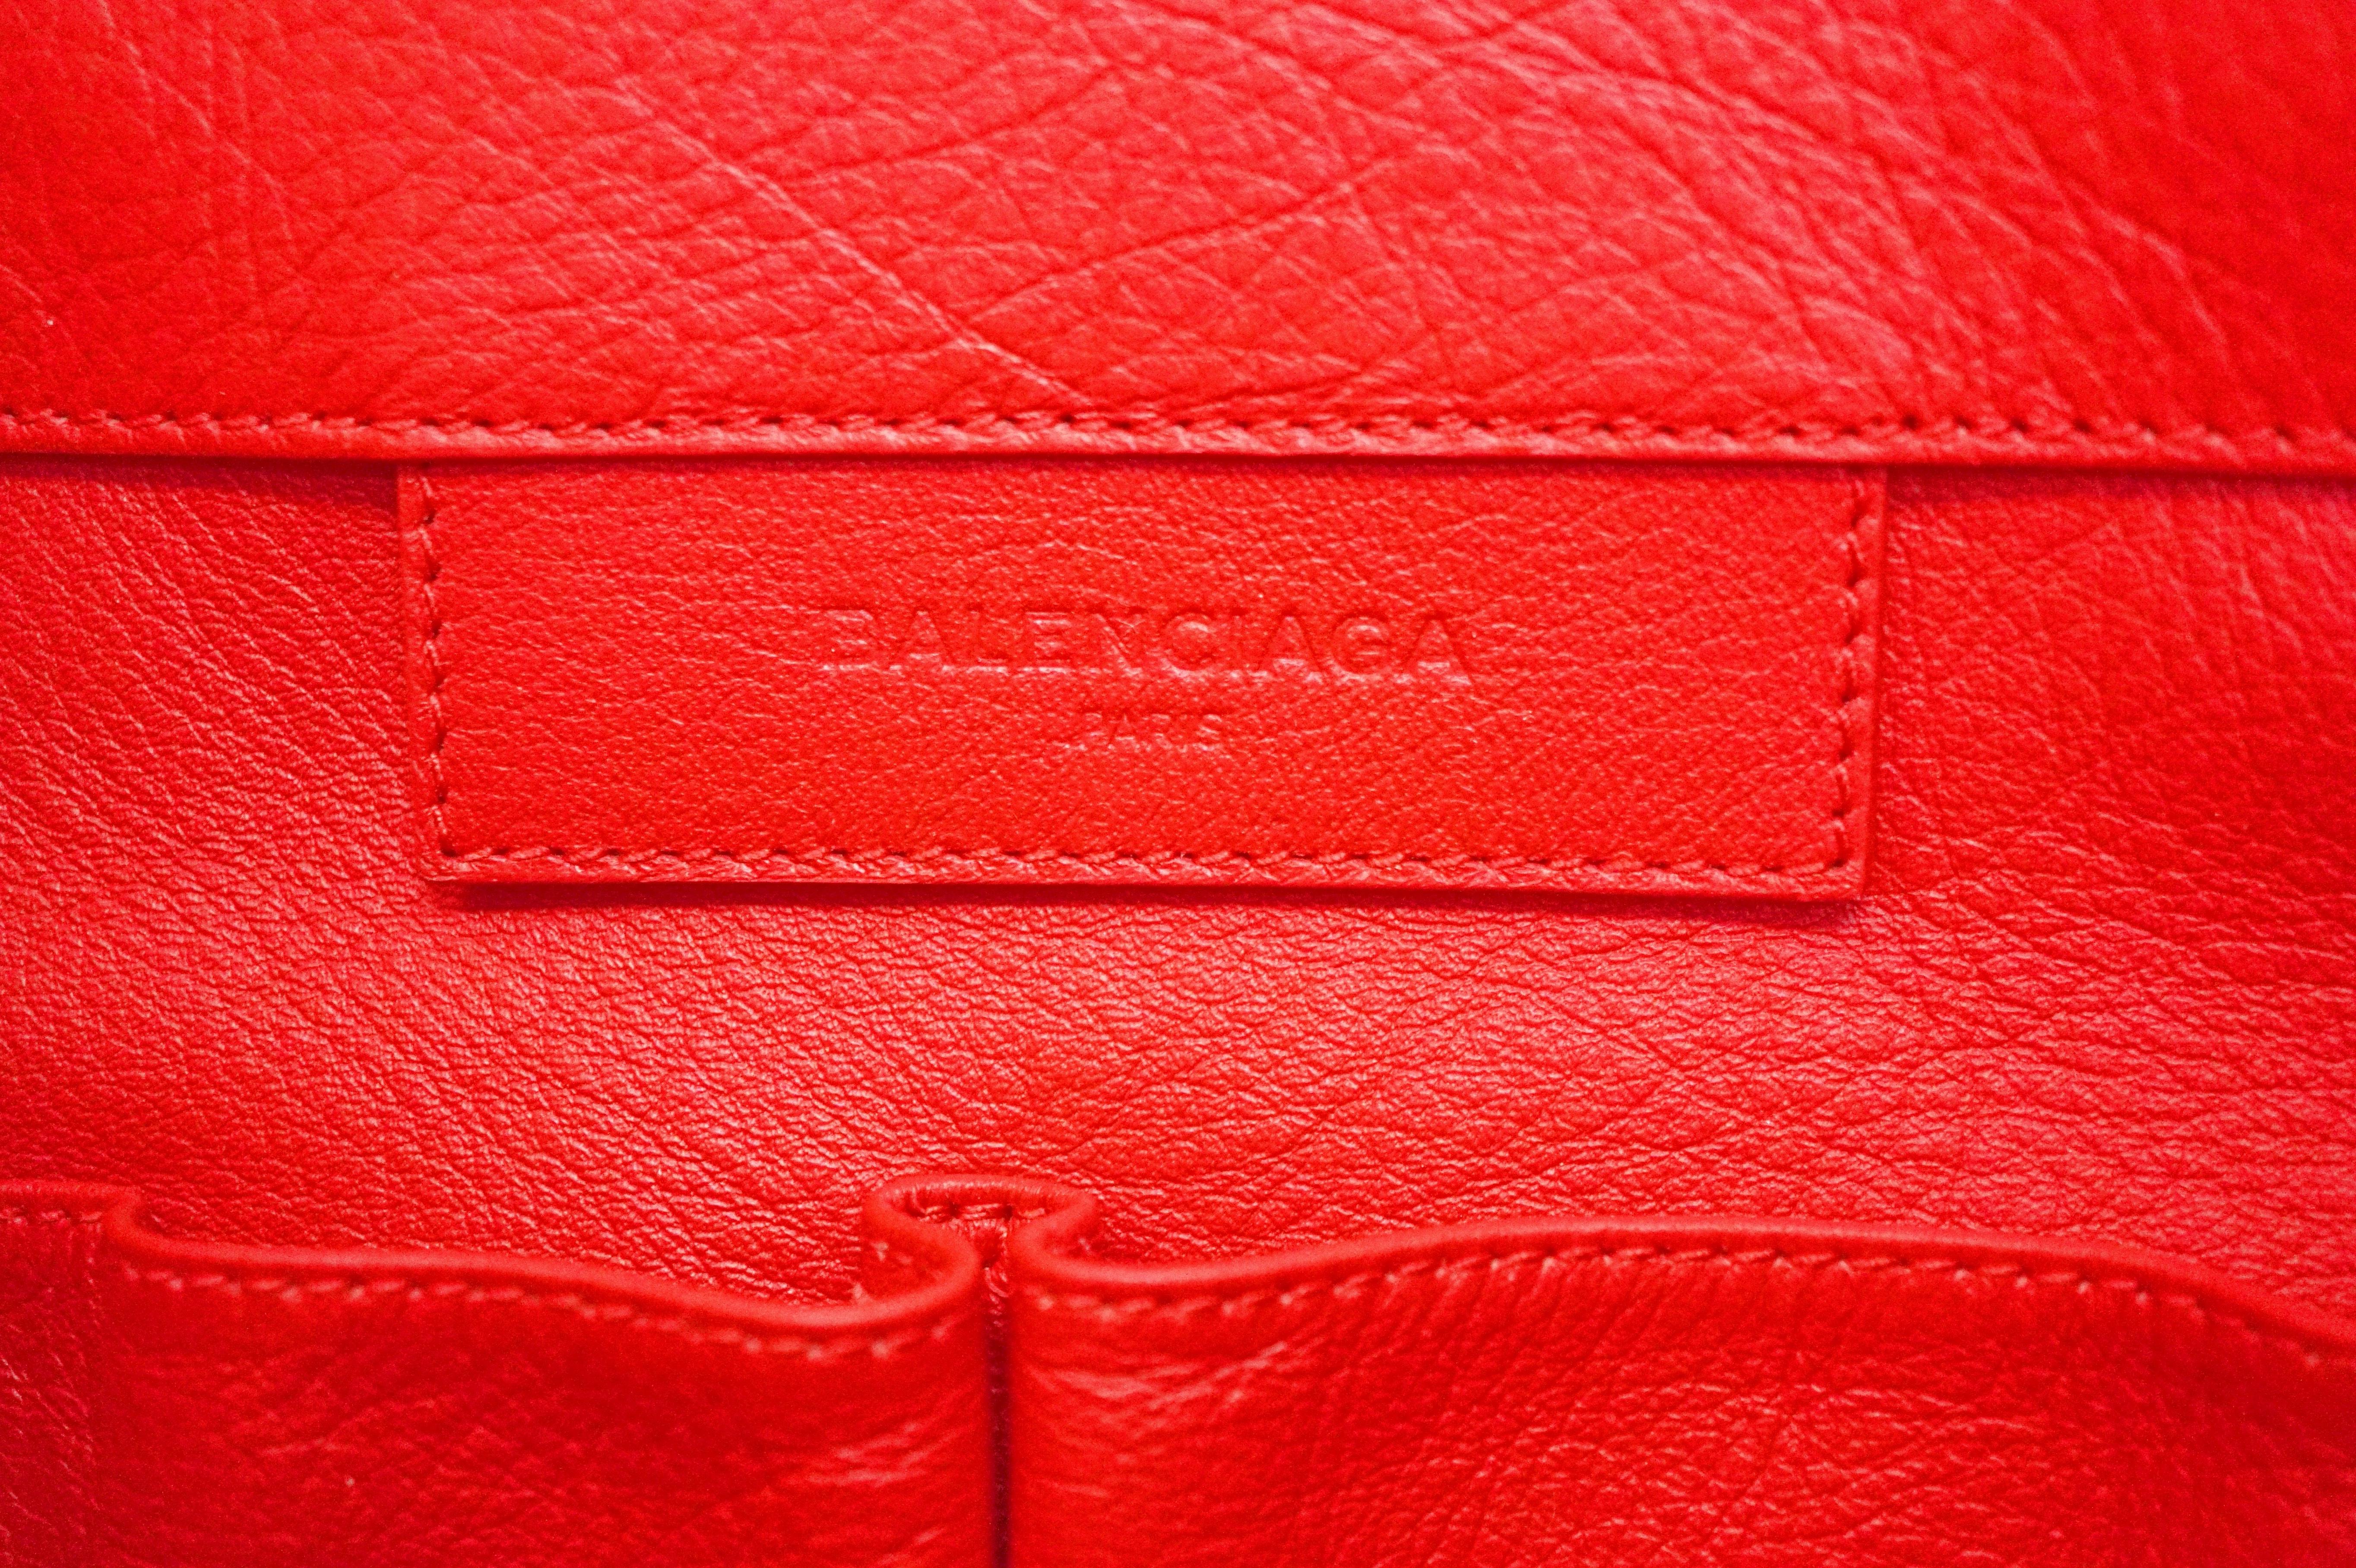 Balenciaga Papier A4 Zip-Around Tote in Red Calfskin Leather, Fall/Winter 2016   4